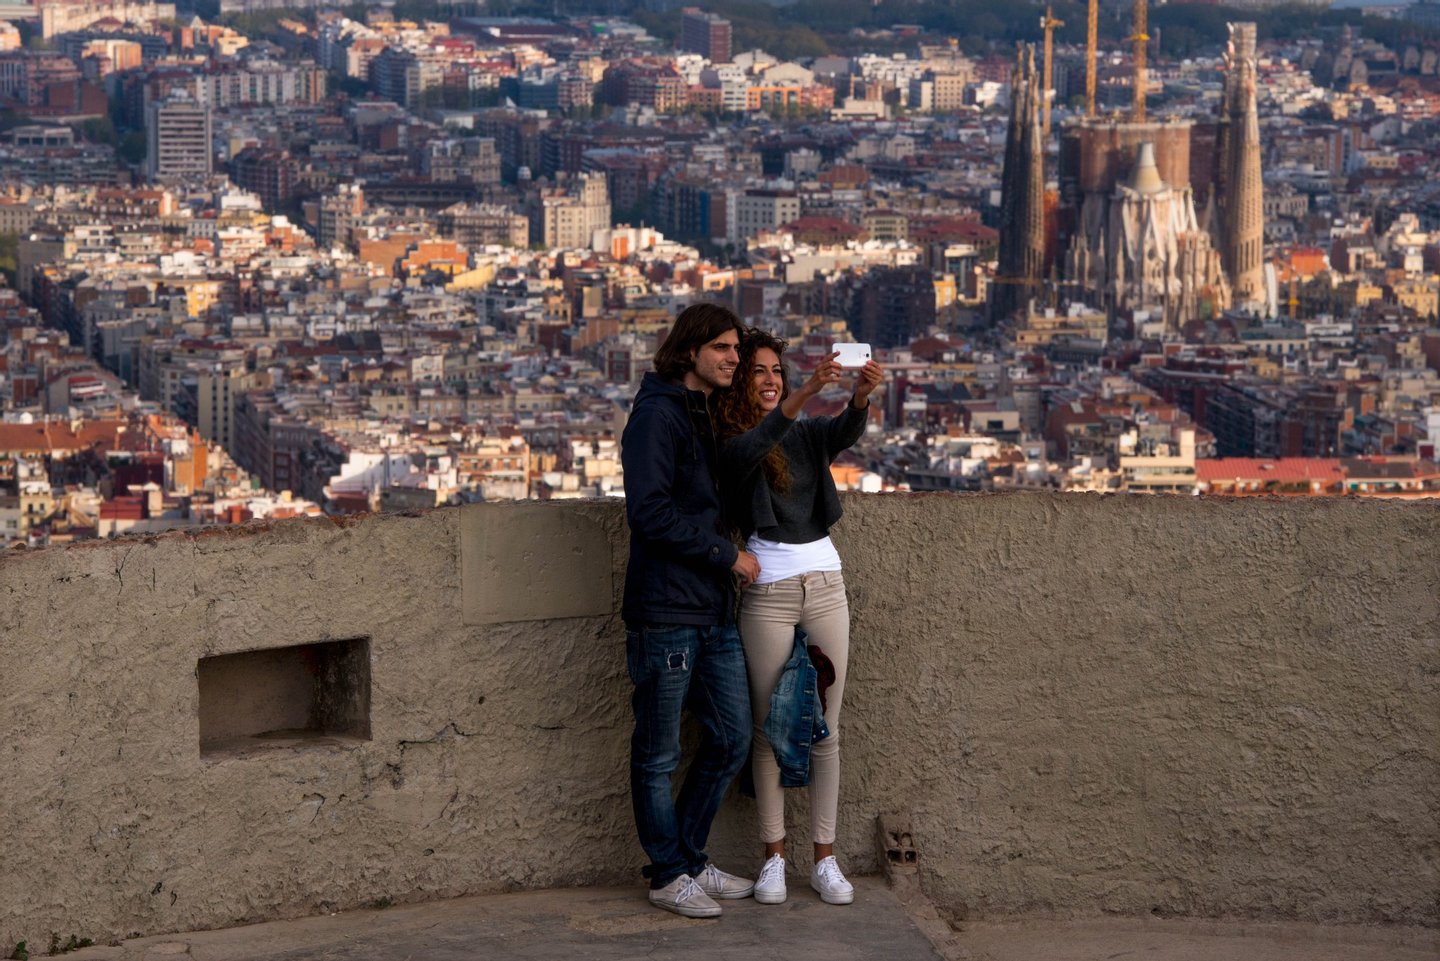 BARCELONA, SPAIN - APRIL 10: A couple take a selfie as they enjoy the views over the city on April 10, 2015 in Barcelona, Spain. Barcelona's city hall has put a regulation in motion that bans large tourist groups visiting Barcelona's most popular market. Barcelona's authorities are debating how to control the number of tourist in the city as an estimated 10 million people are due to visit this year. (Photo by David Ramos/Getty Images)